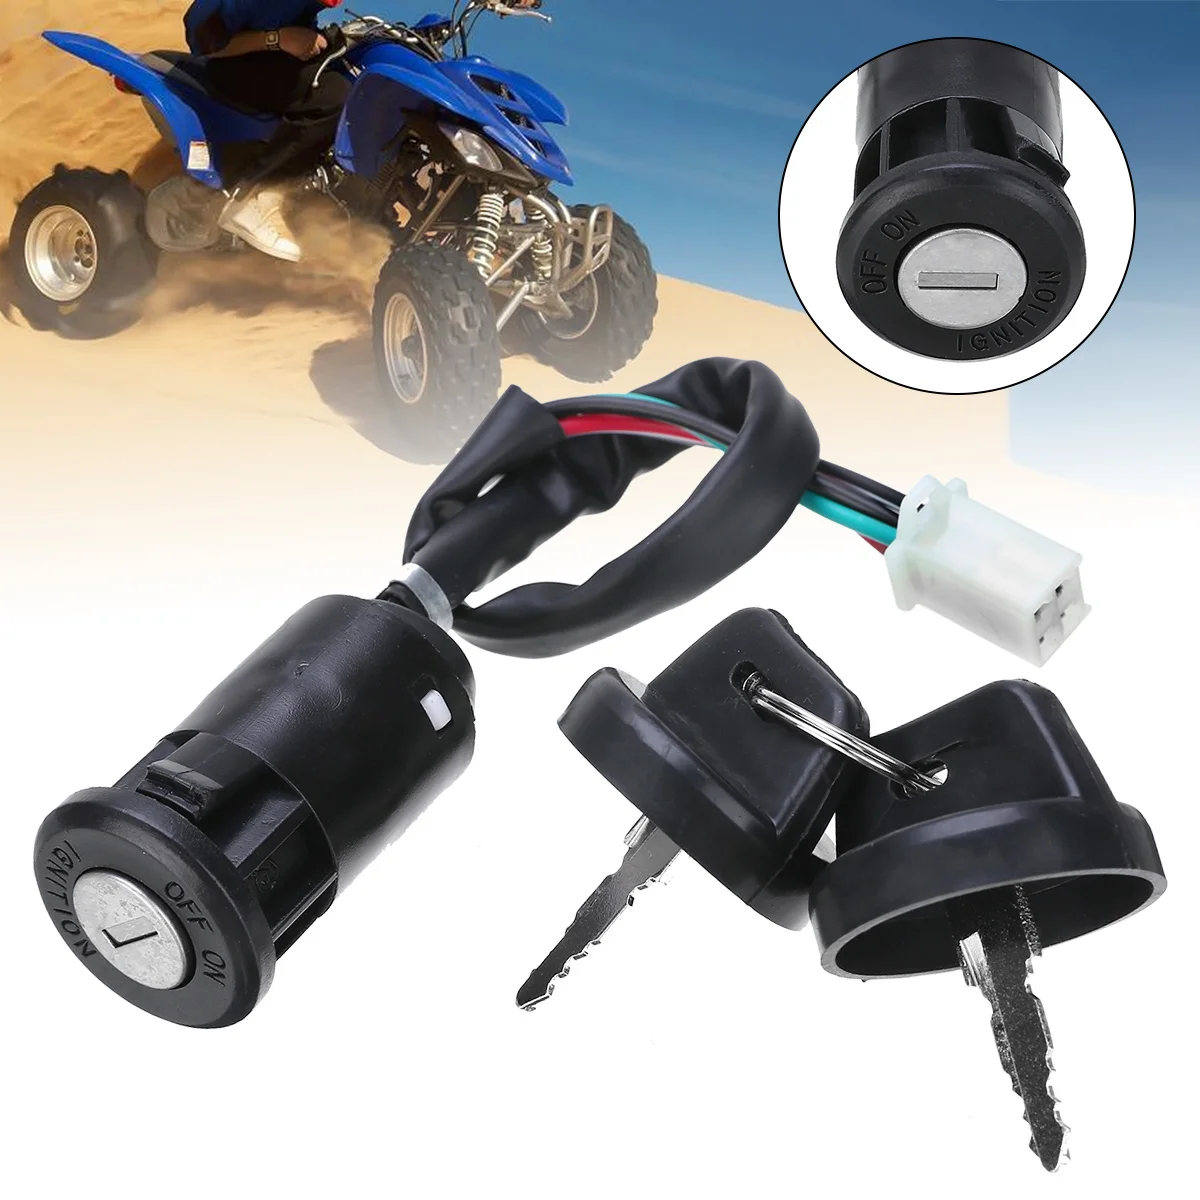 Universal Motorcycle 2 Ignition Key Switch 4 Wire On/Off Quad Motorbike Start - $16.88